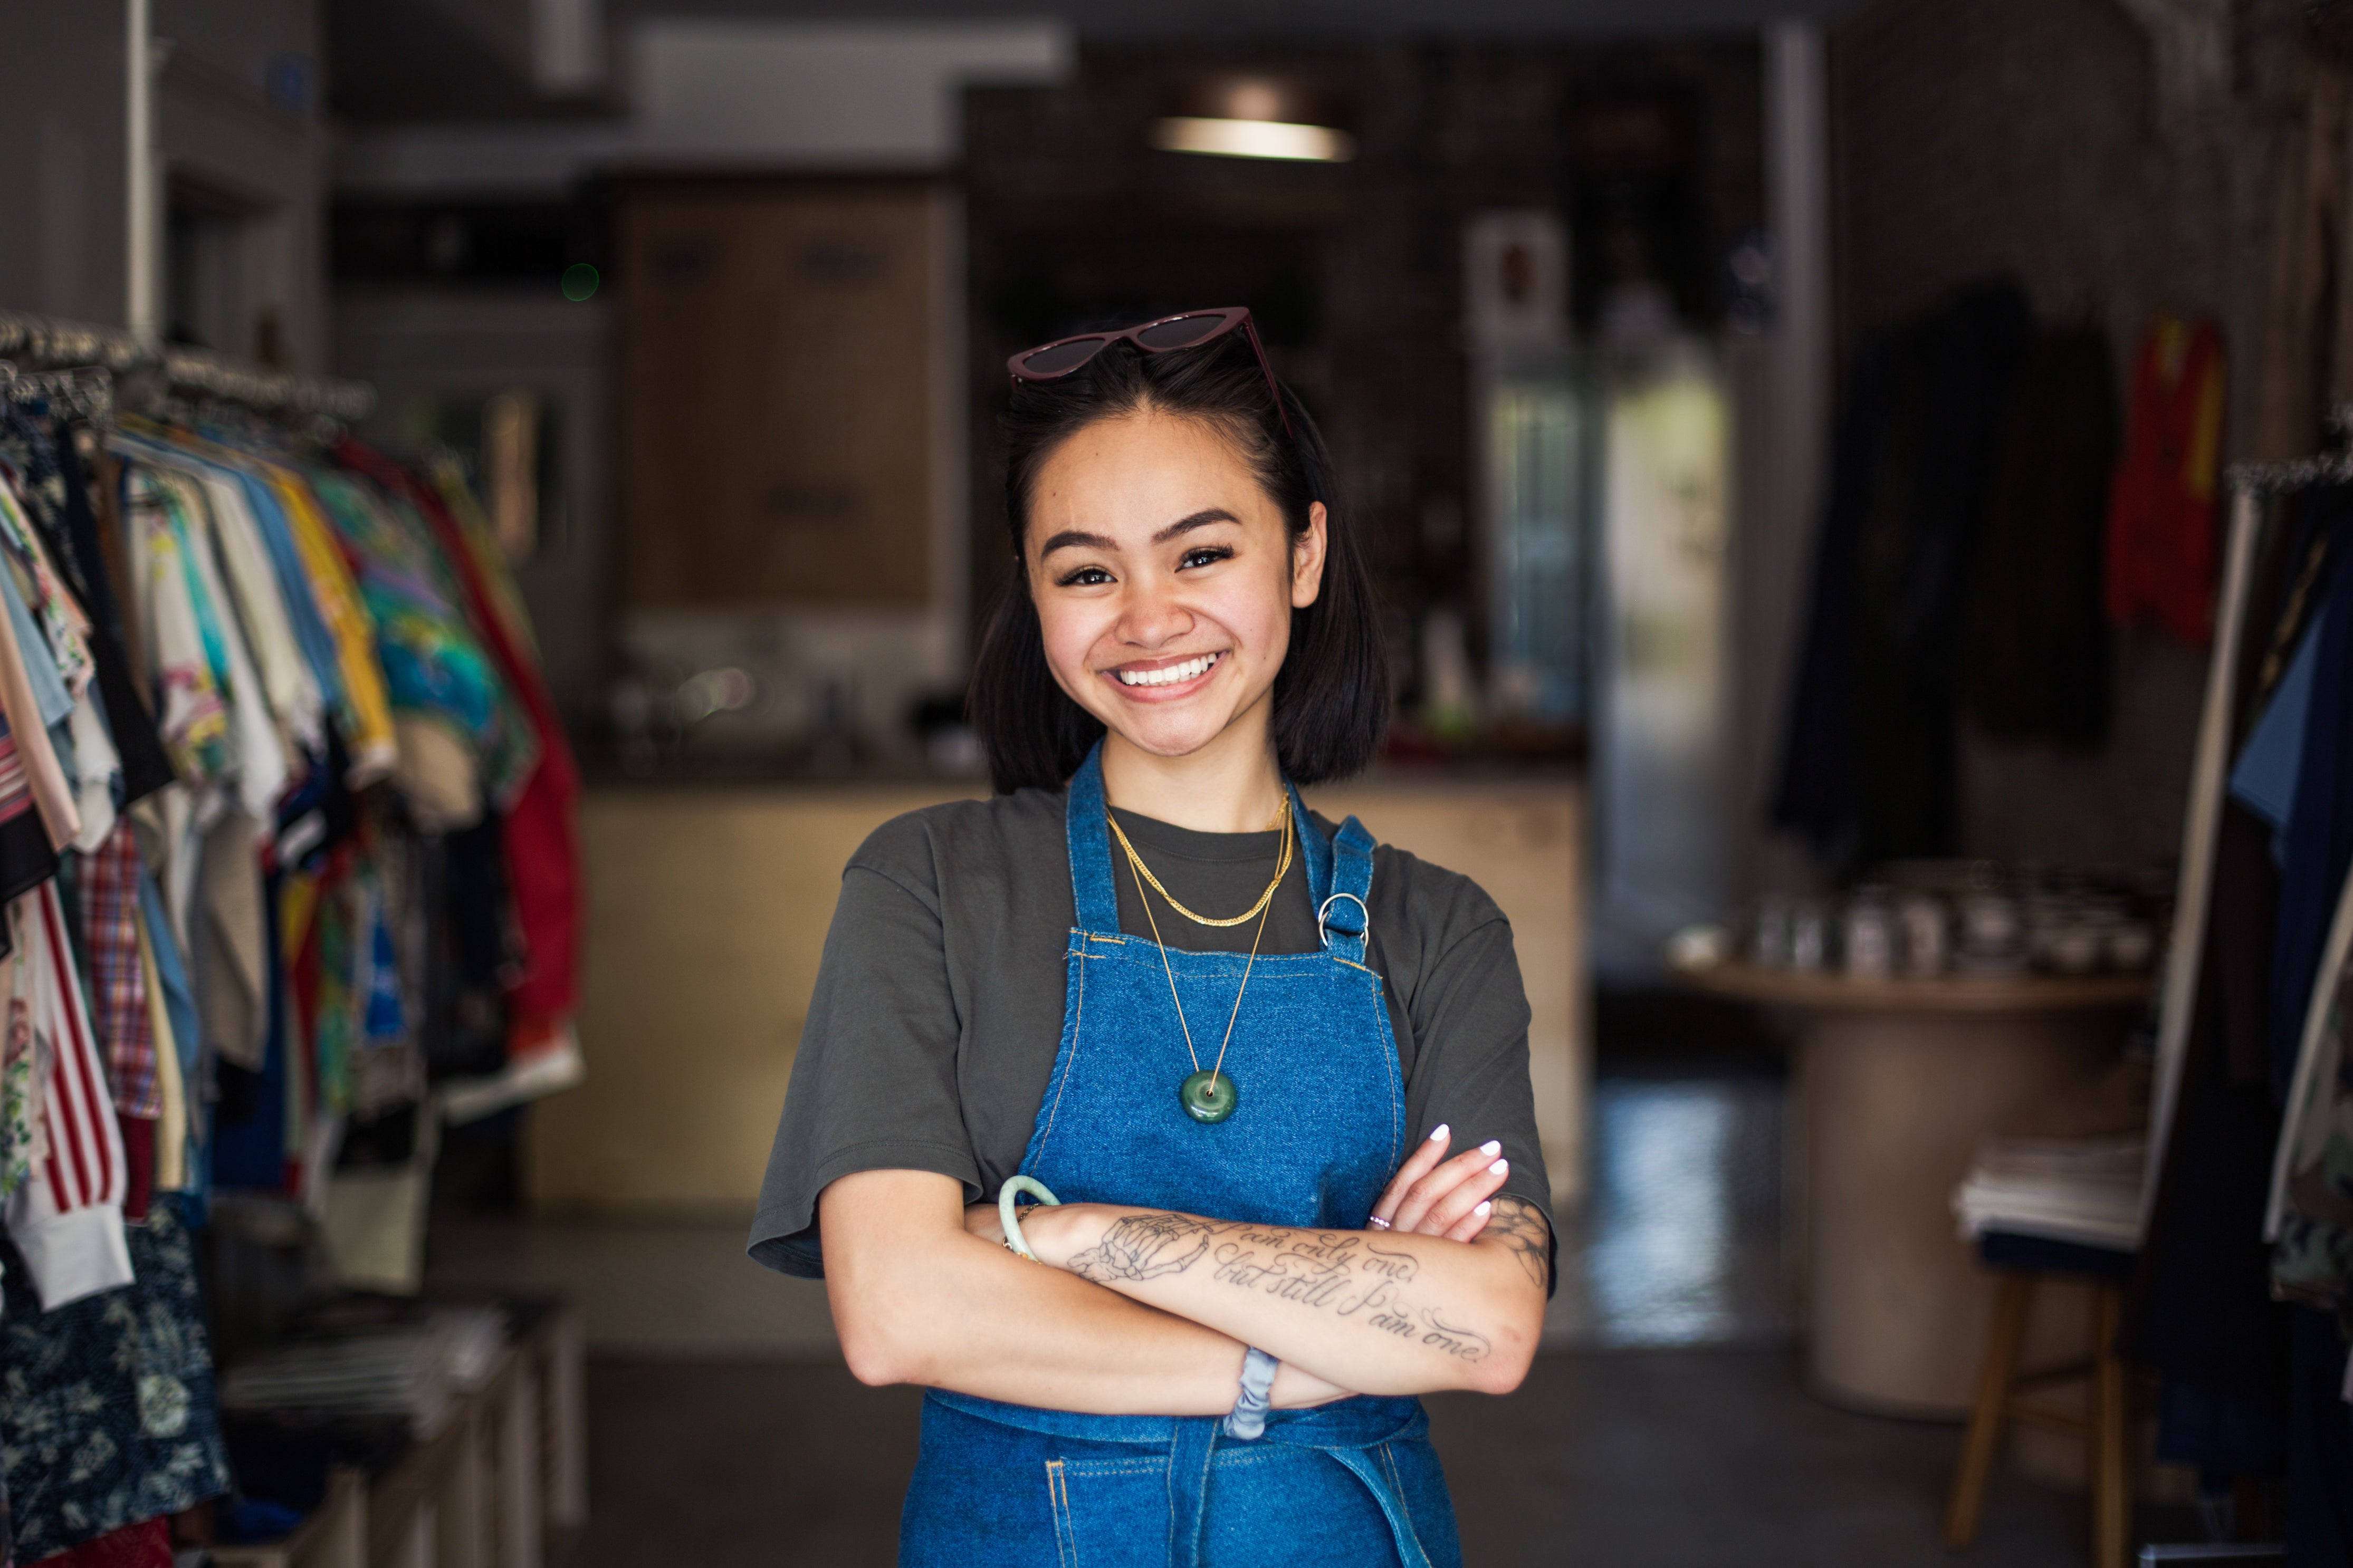 A smiling woman wearing denim overalls with her arms crossed over her chest standing inside a clothing store.